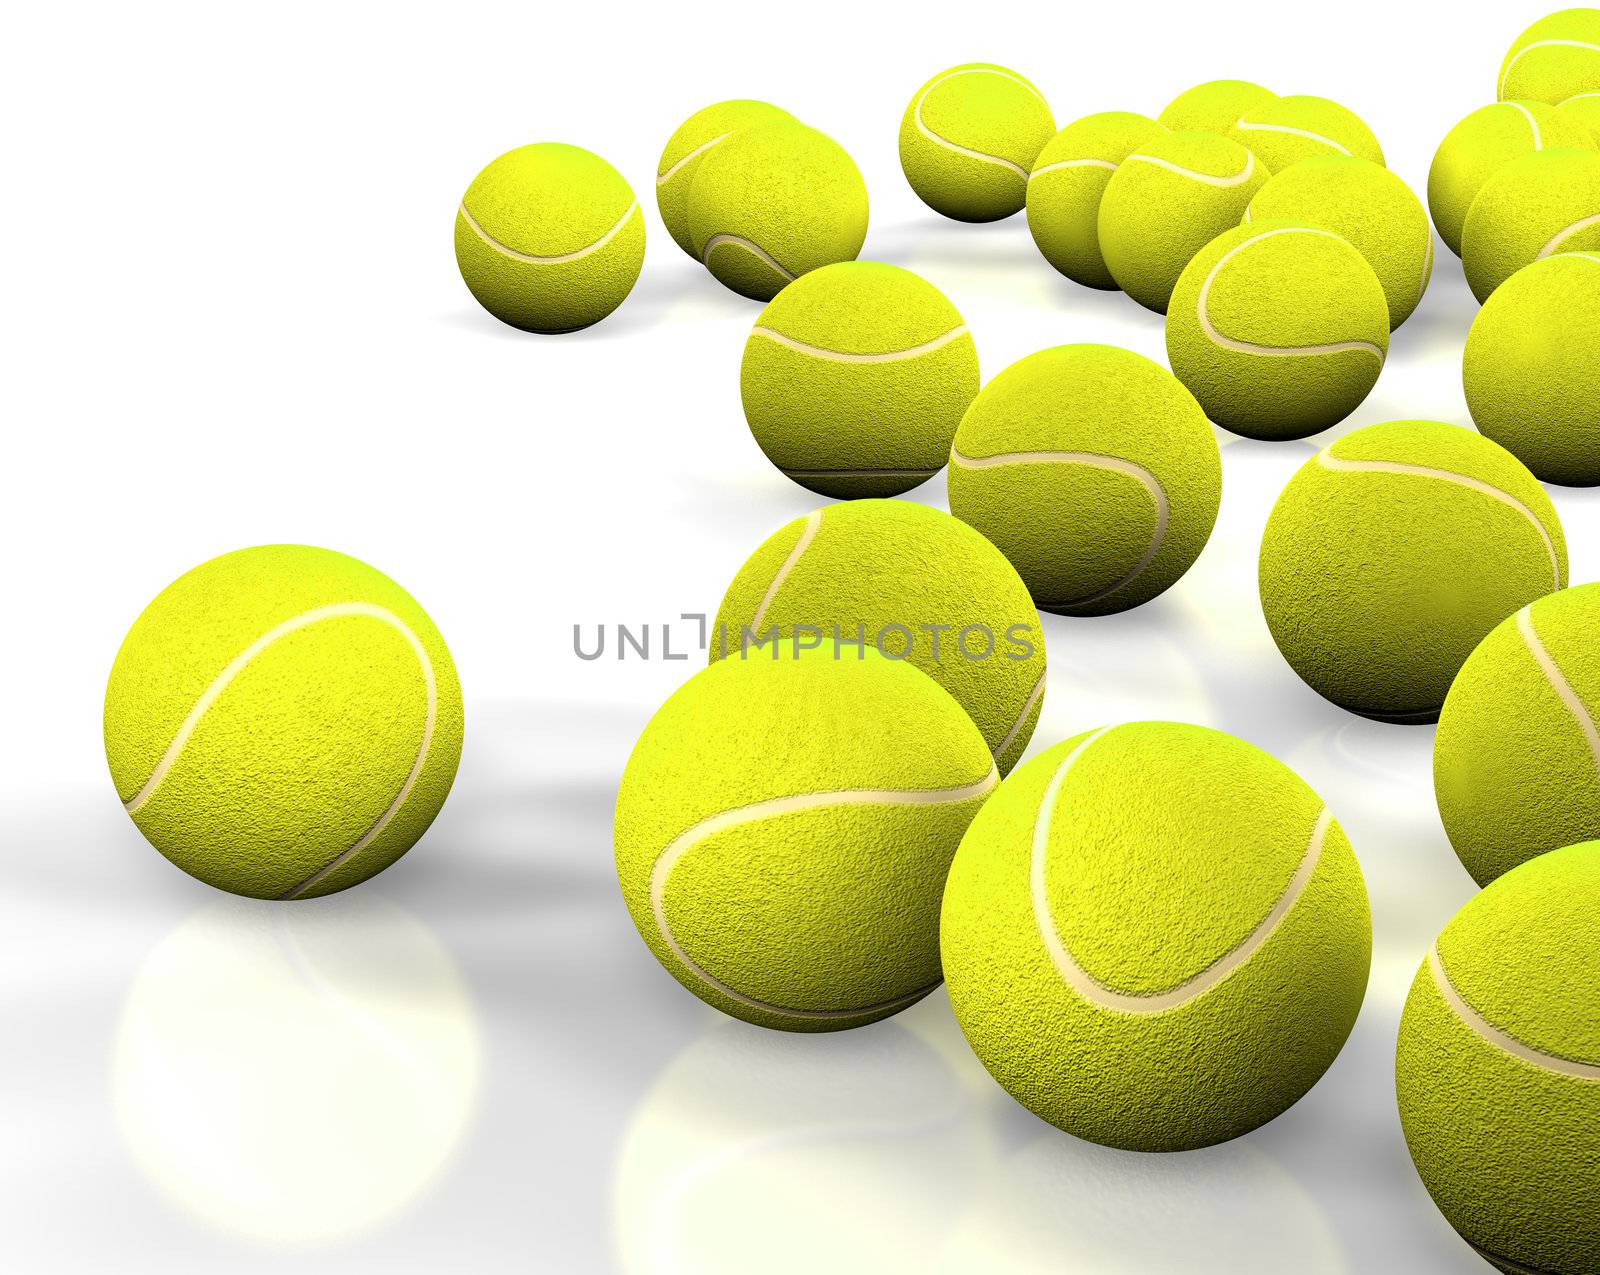 3d image of several tennis ball isolated in white